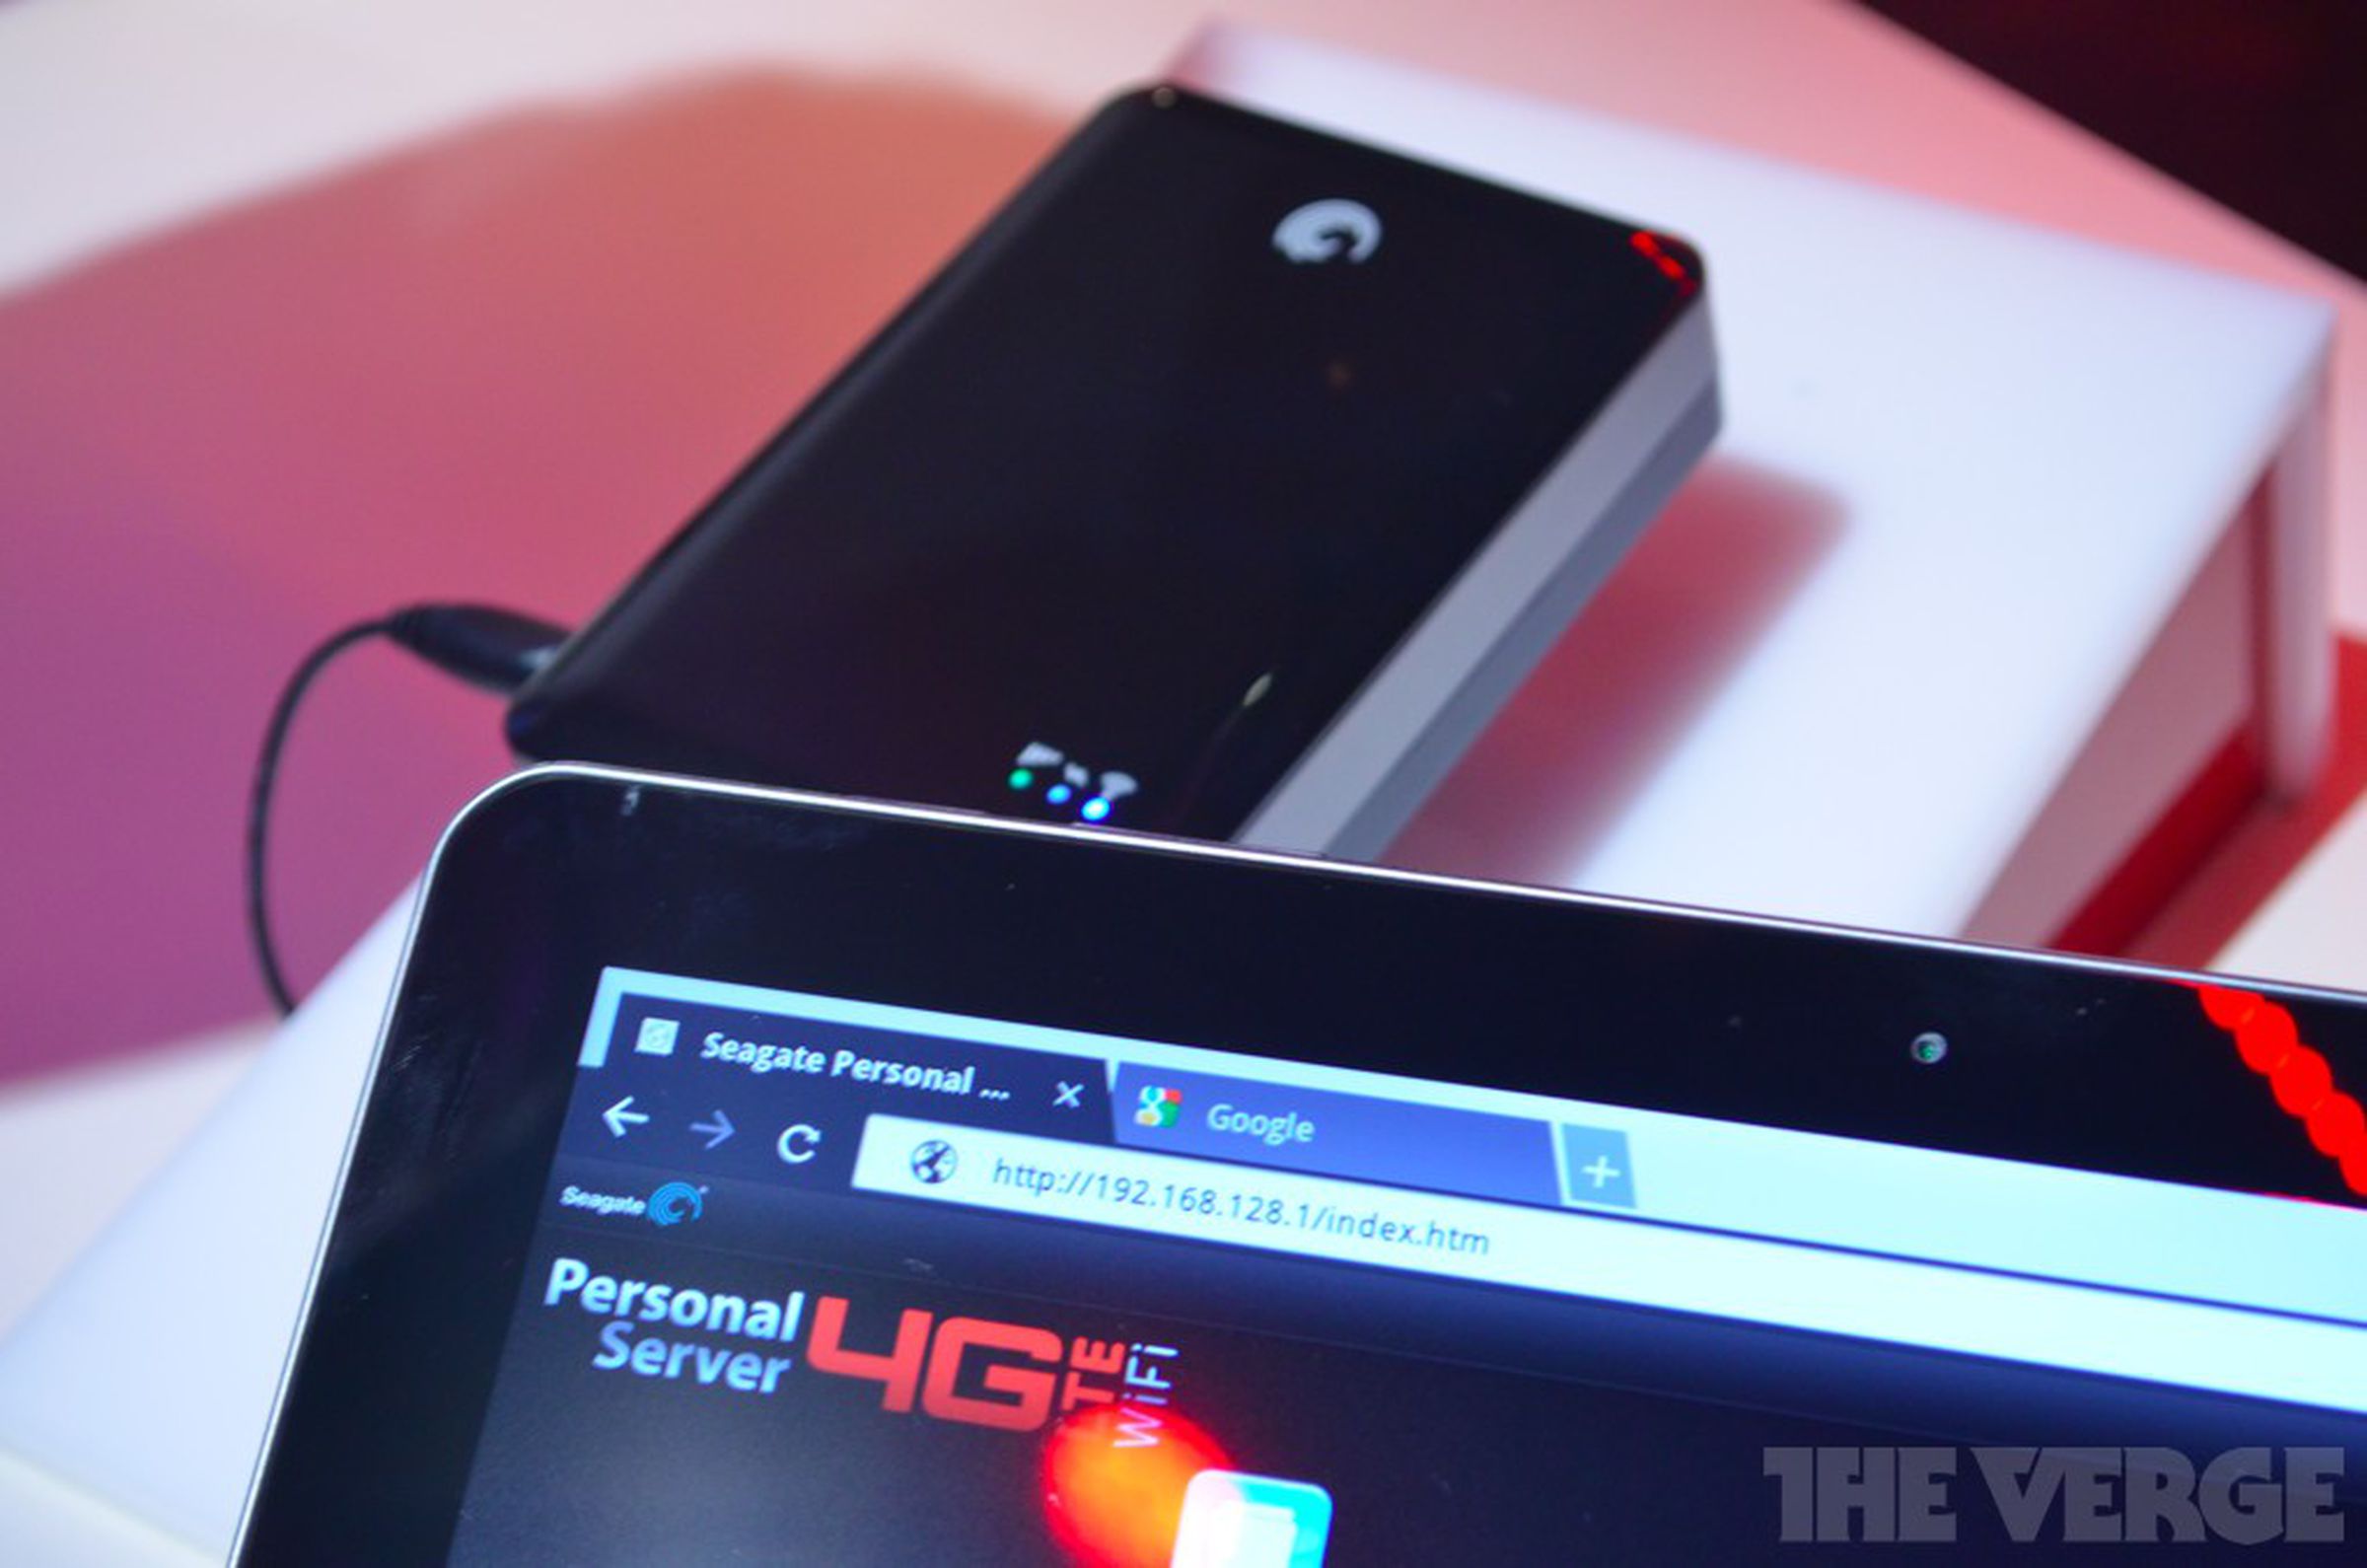 Seagate Satellite 4G LTE-enabled hard drive hands-on pictures